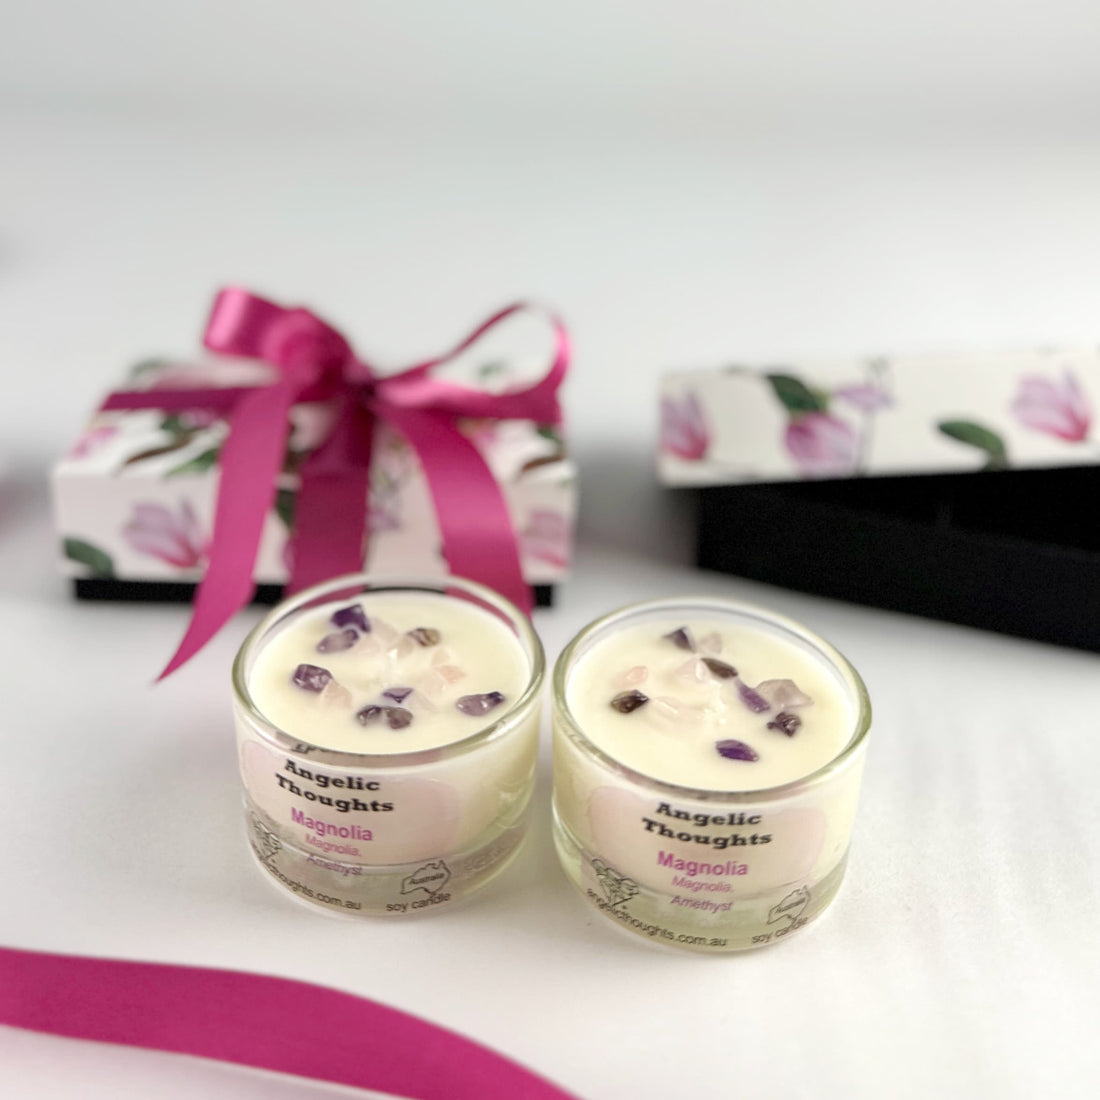 magnolia scented rose quartz and amethyst embellished hand poured tealights in glass tealight containers with magnolia 2pack tealight product box tied with deep pink ribbon in background